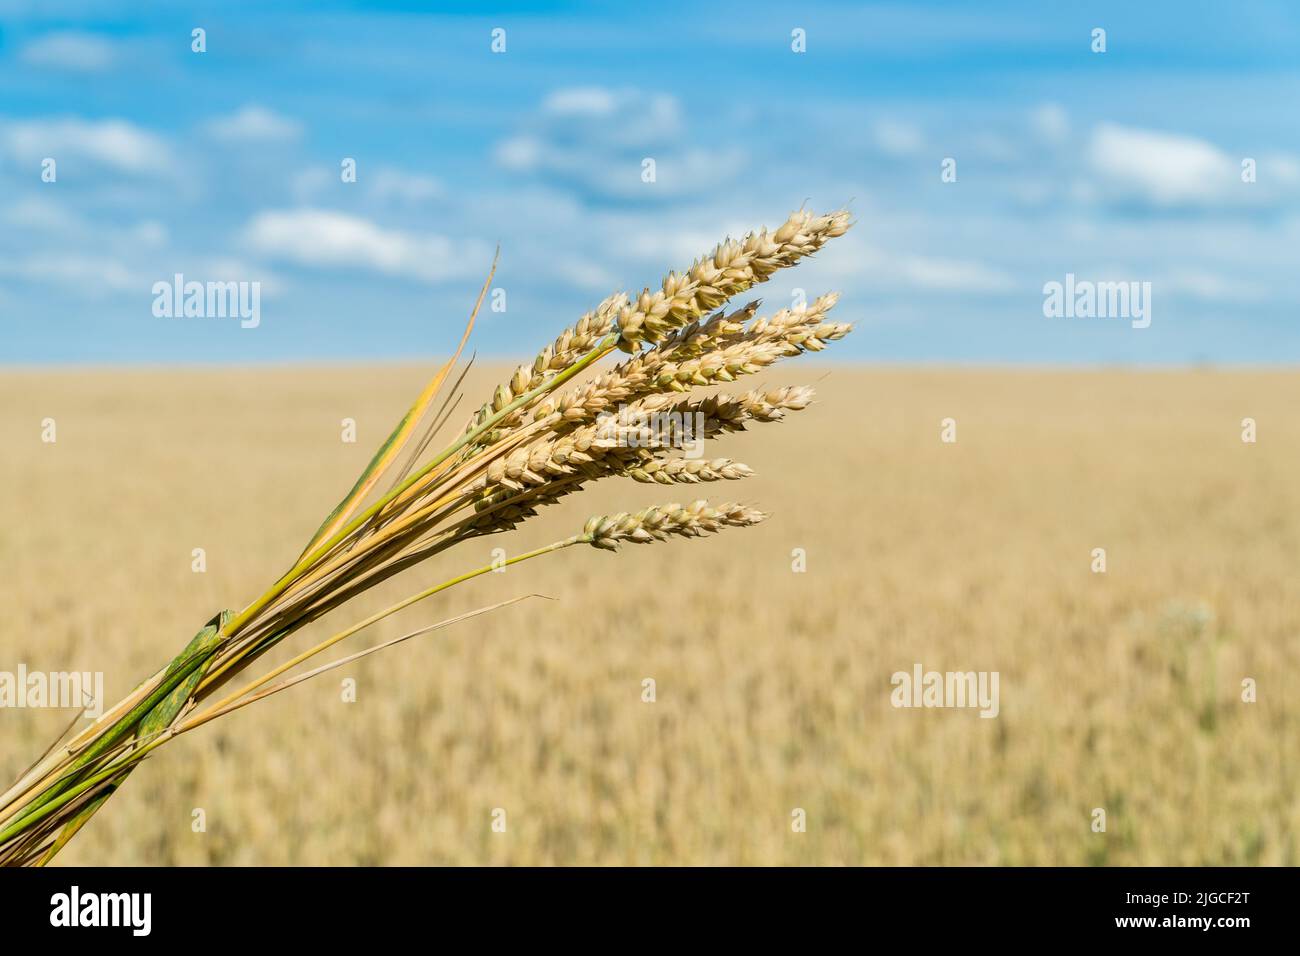 Bunch of ears of wheat in a wheat field. World food security concept. Stock Photo